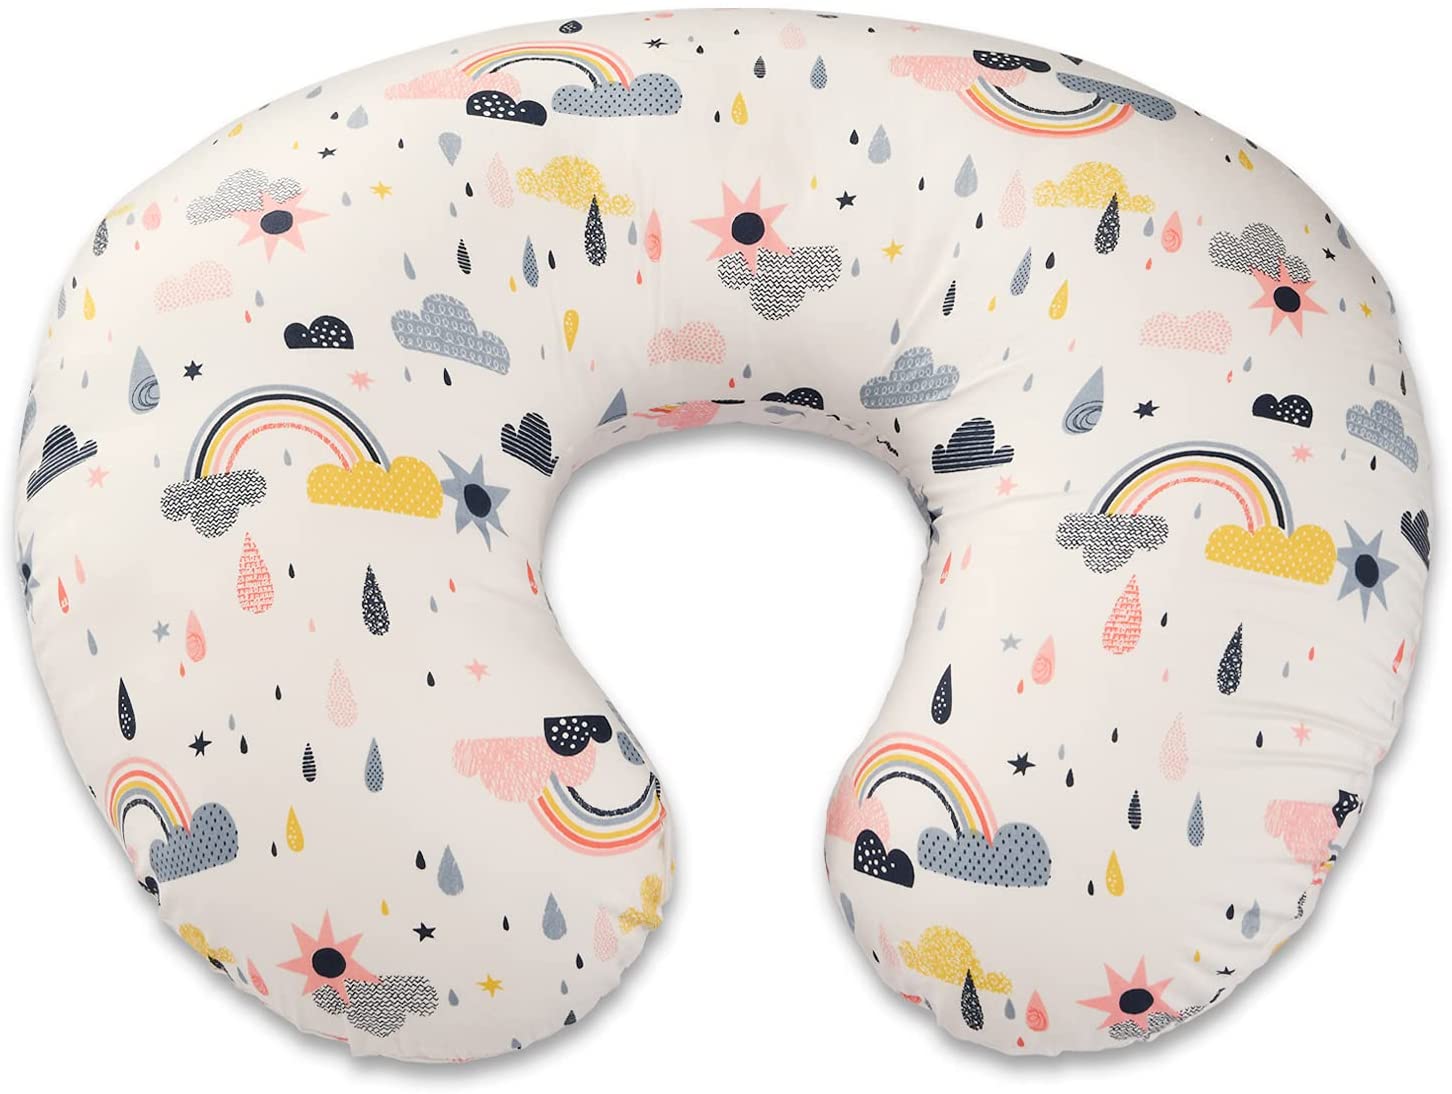 Awake-Time Support with Removable Premium Cotton Nursing Pillow Cover for Baby Boys Girls Forest Bottle Feeding Baby Support Queness Nursing Pillow and Positioner for Breastfeeding 